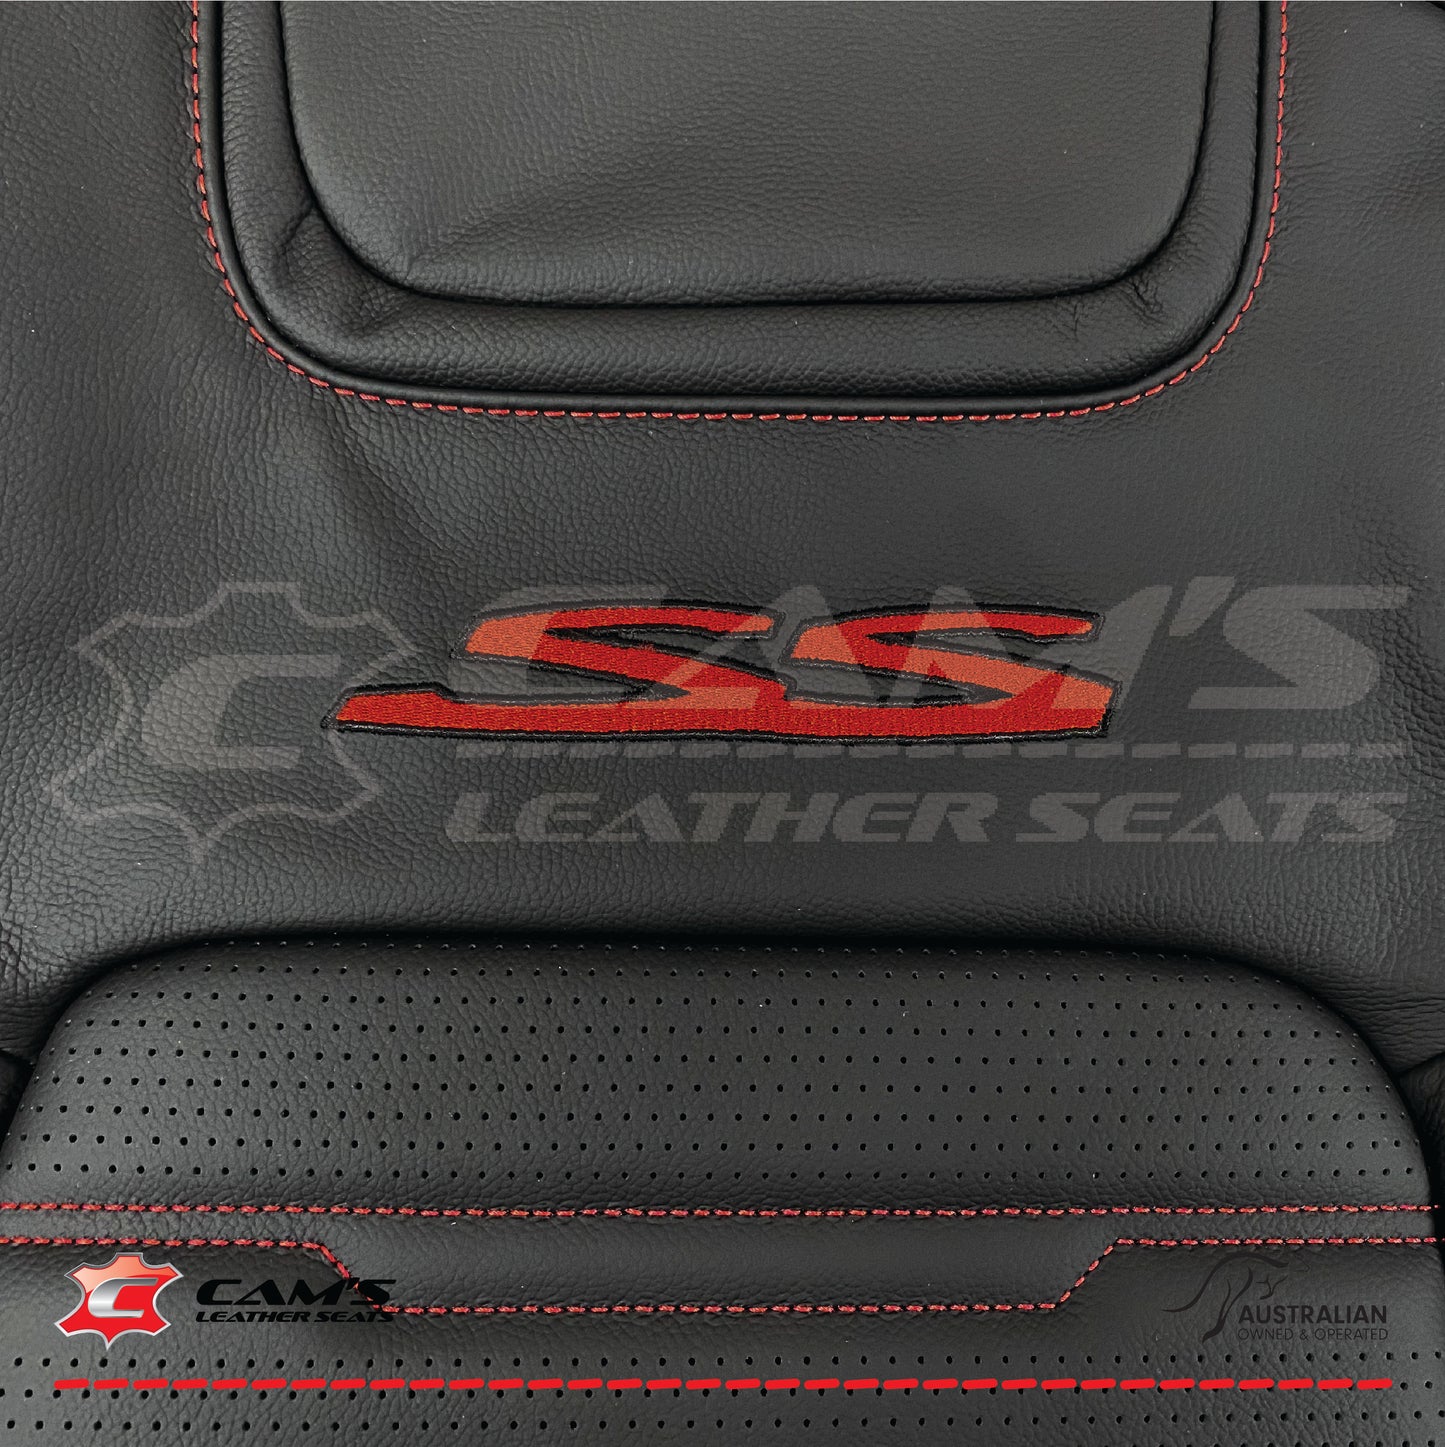 LEATHER SEATS TRIM KIT FOR HOLDEN VE SS UTE ONYX RED SPECIAL STITCH INSERTS